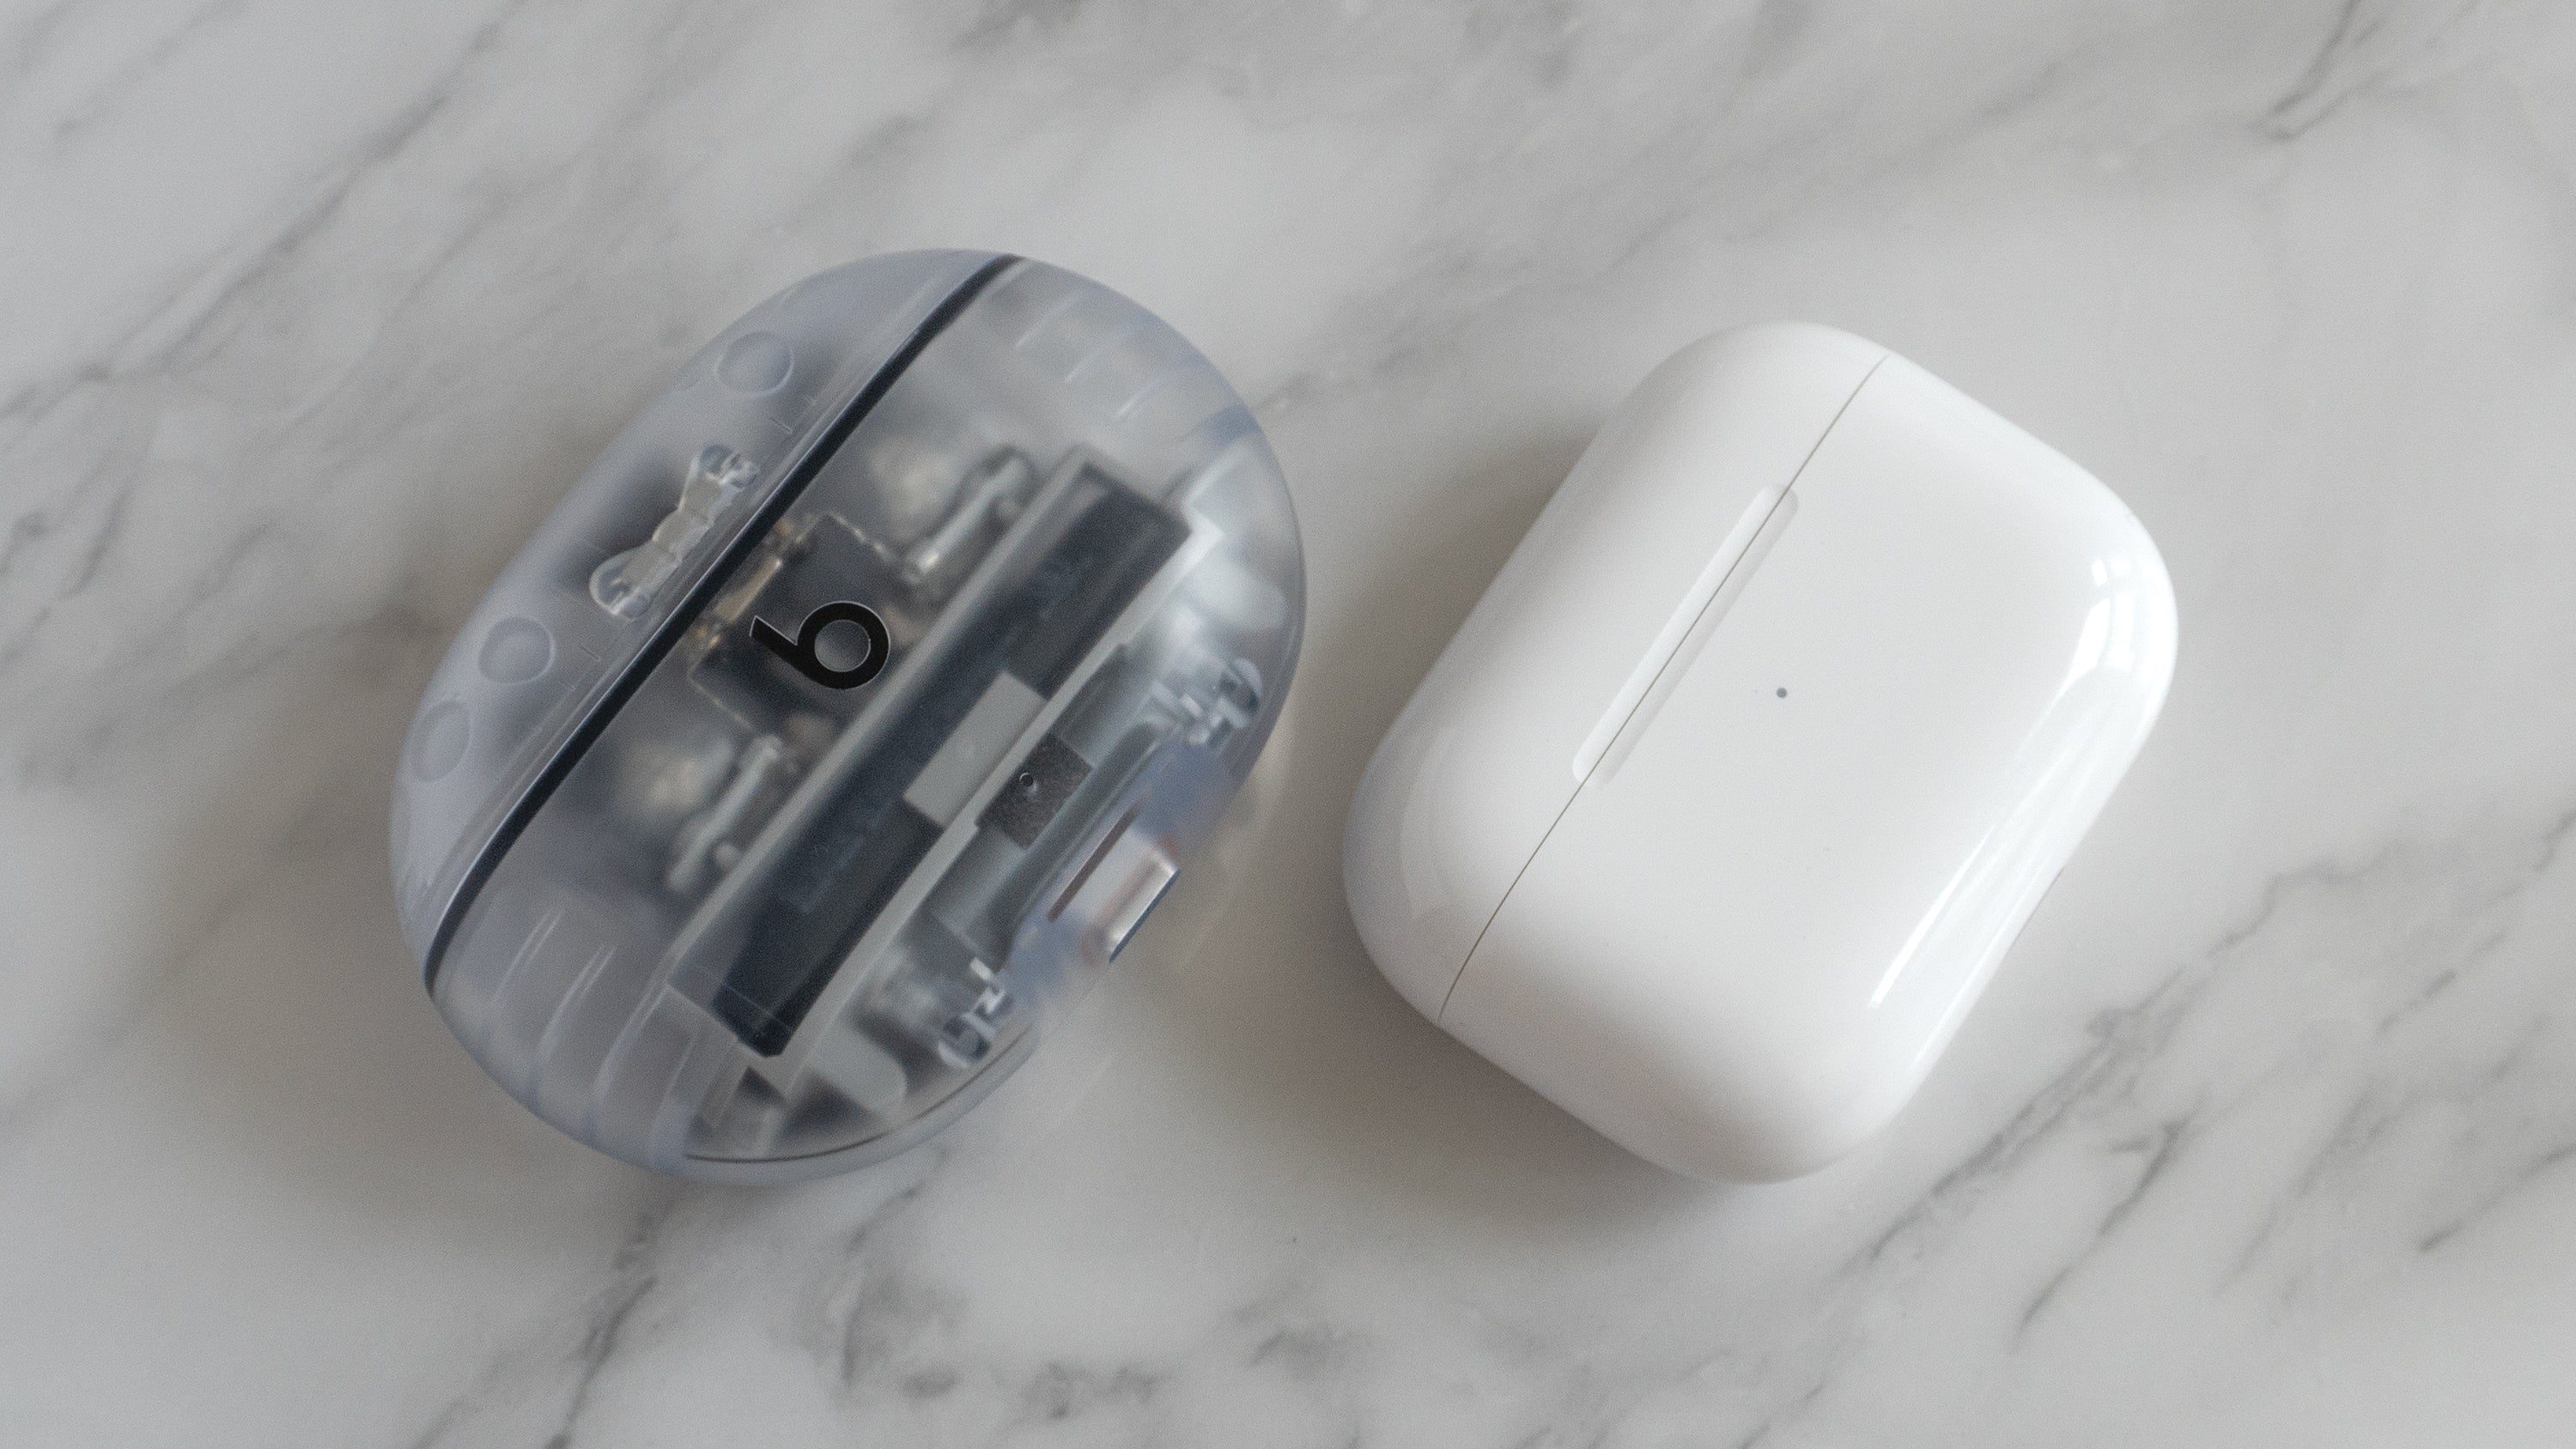 The Beats Studio Buds + charging case (left) is a bit chunkier than the AirPods Pro 2 charging case (right). (Photo: Andrew Liszewski | Gizmodo)